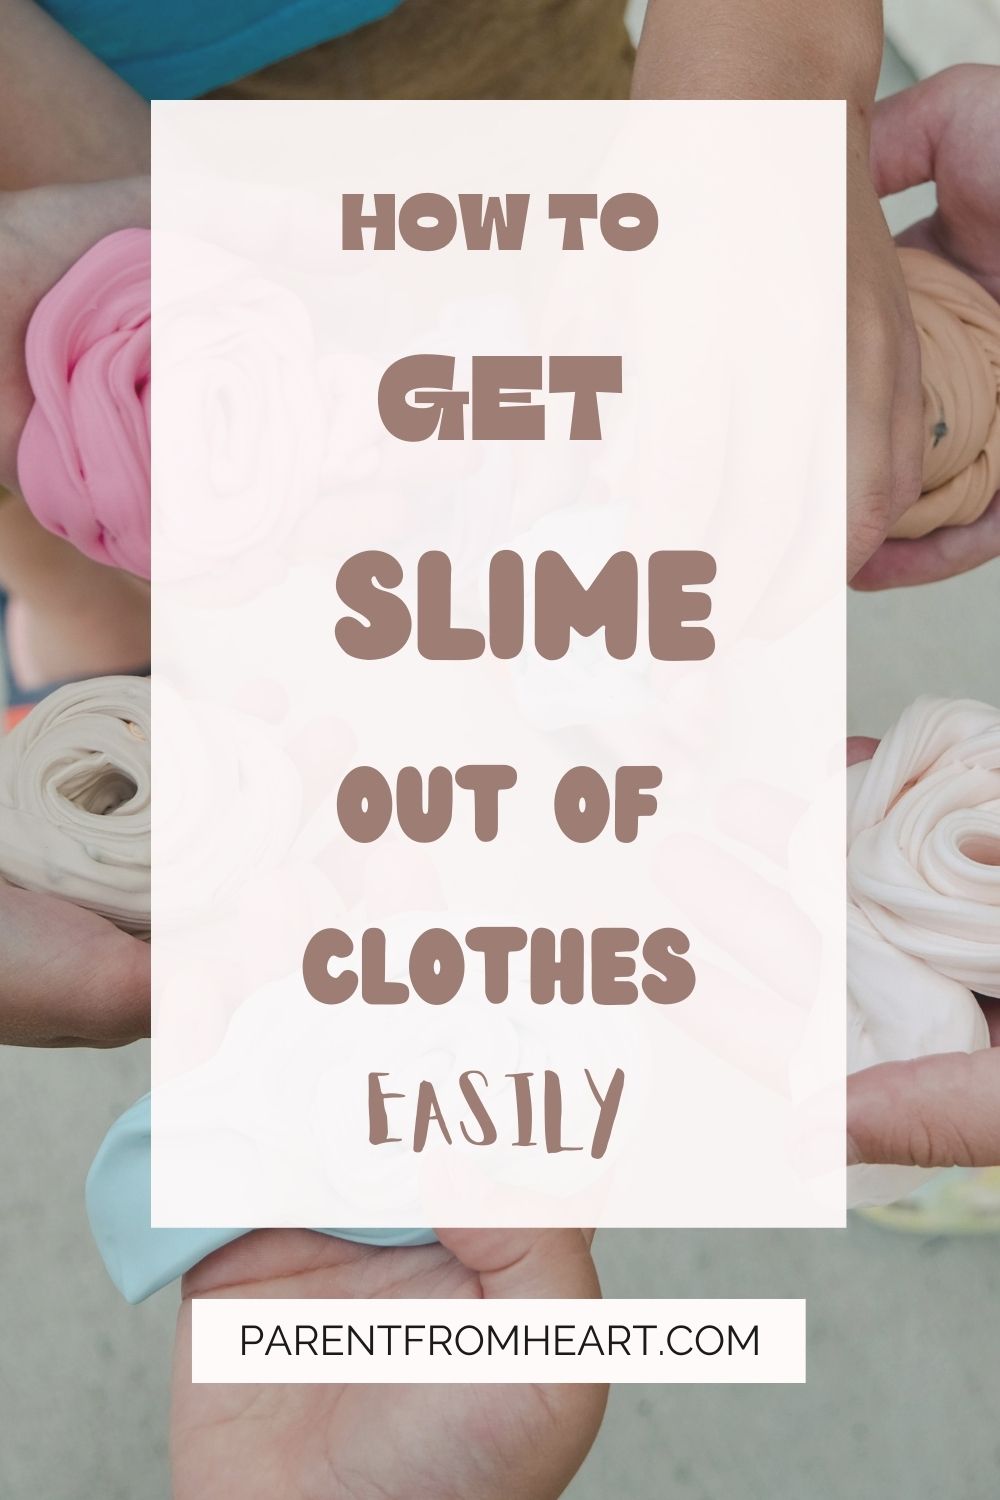 How to Get Slime Out of Clothes Easily! 